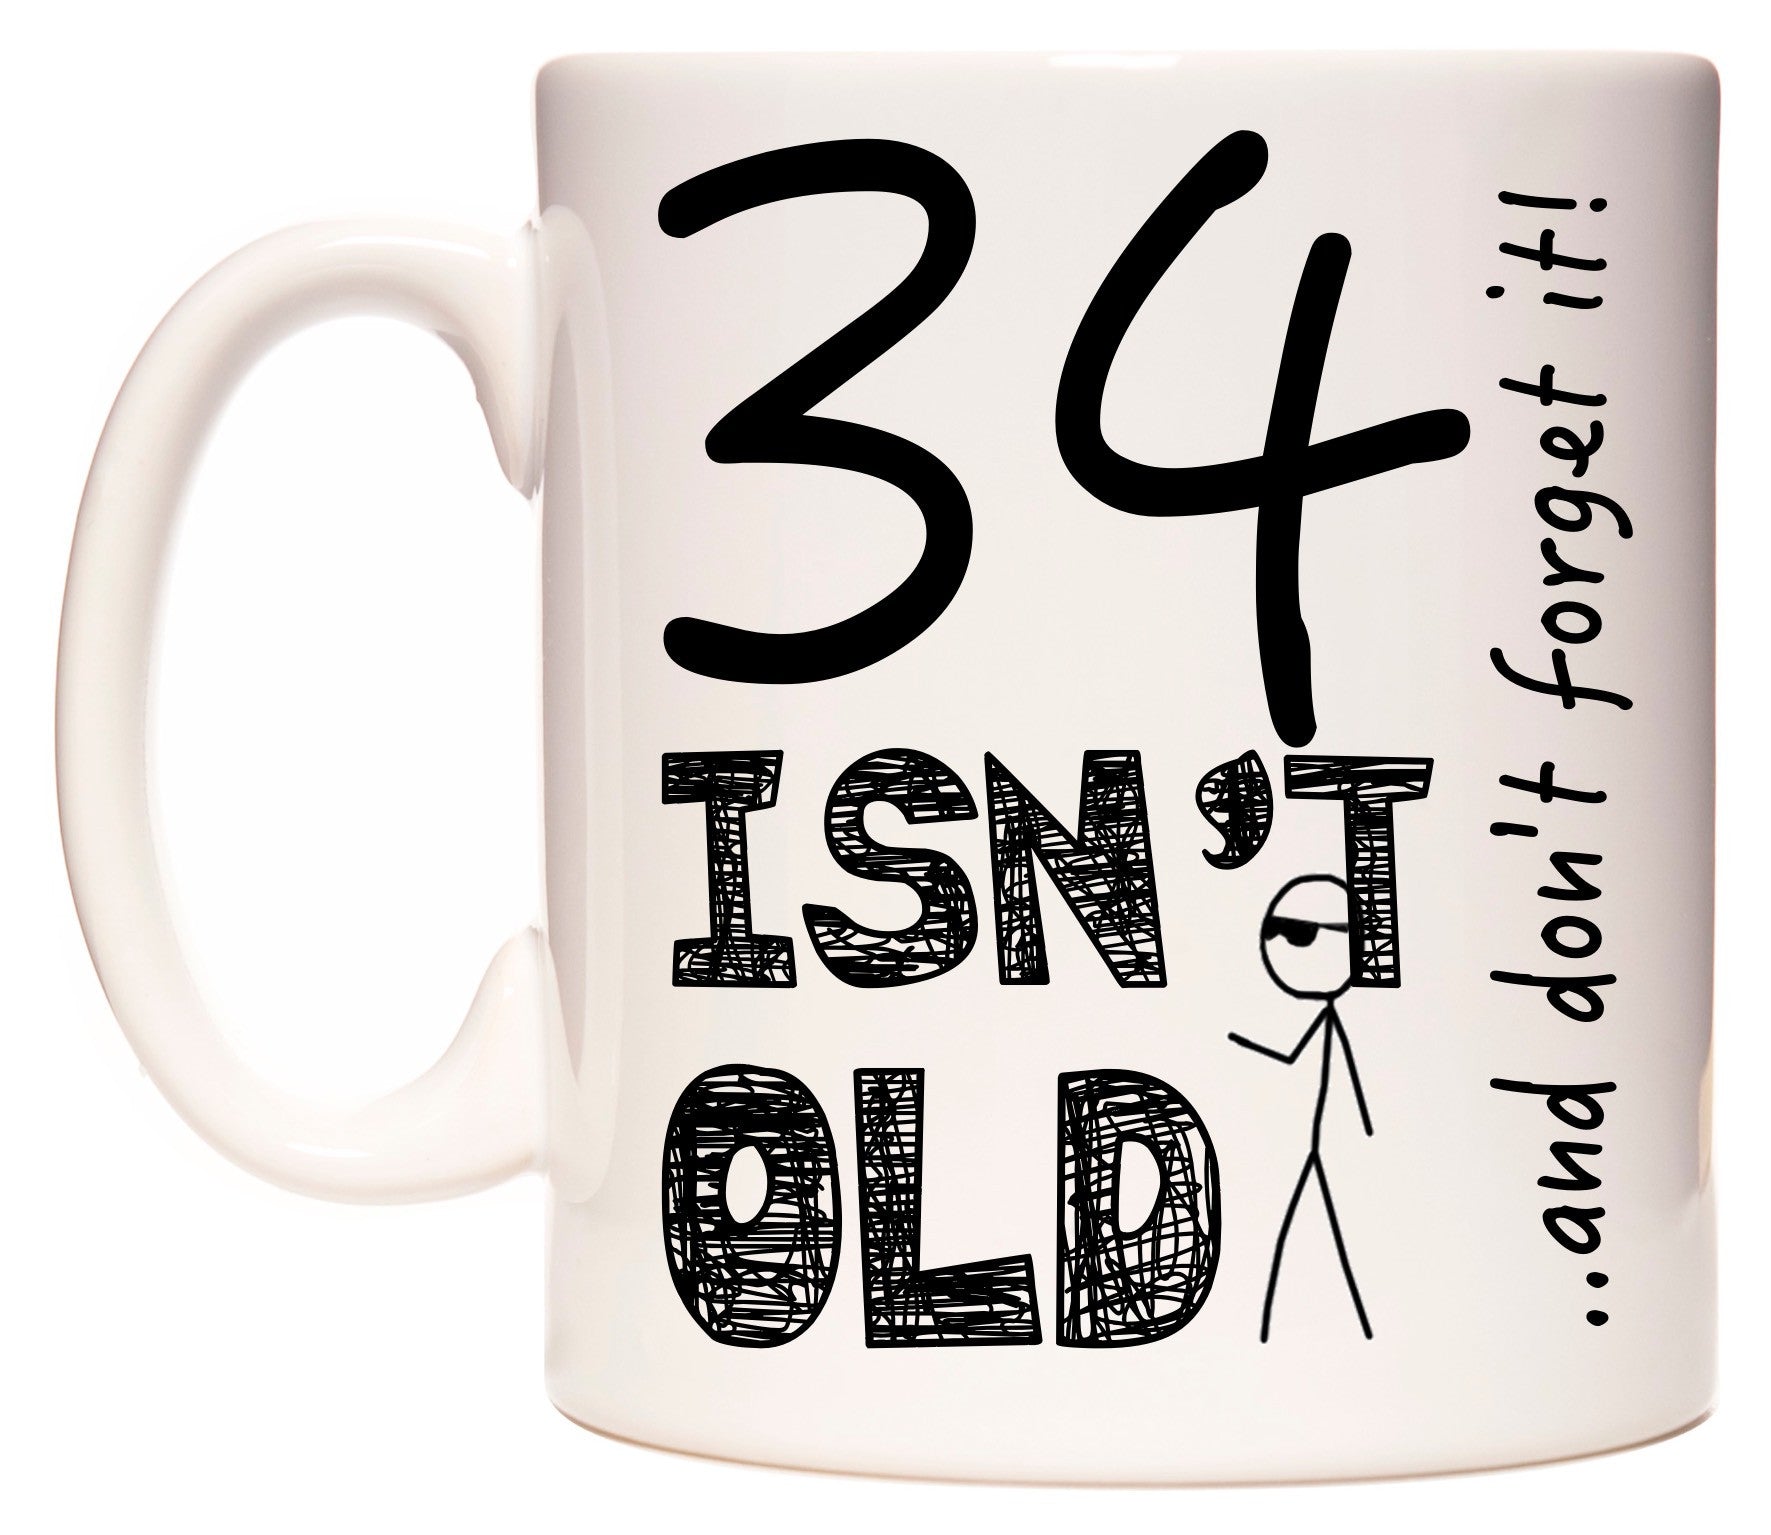 This mug features 34 Isn't Old